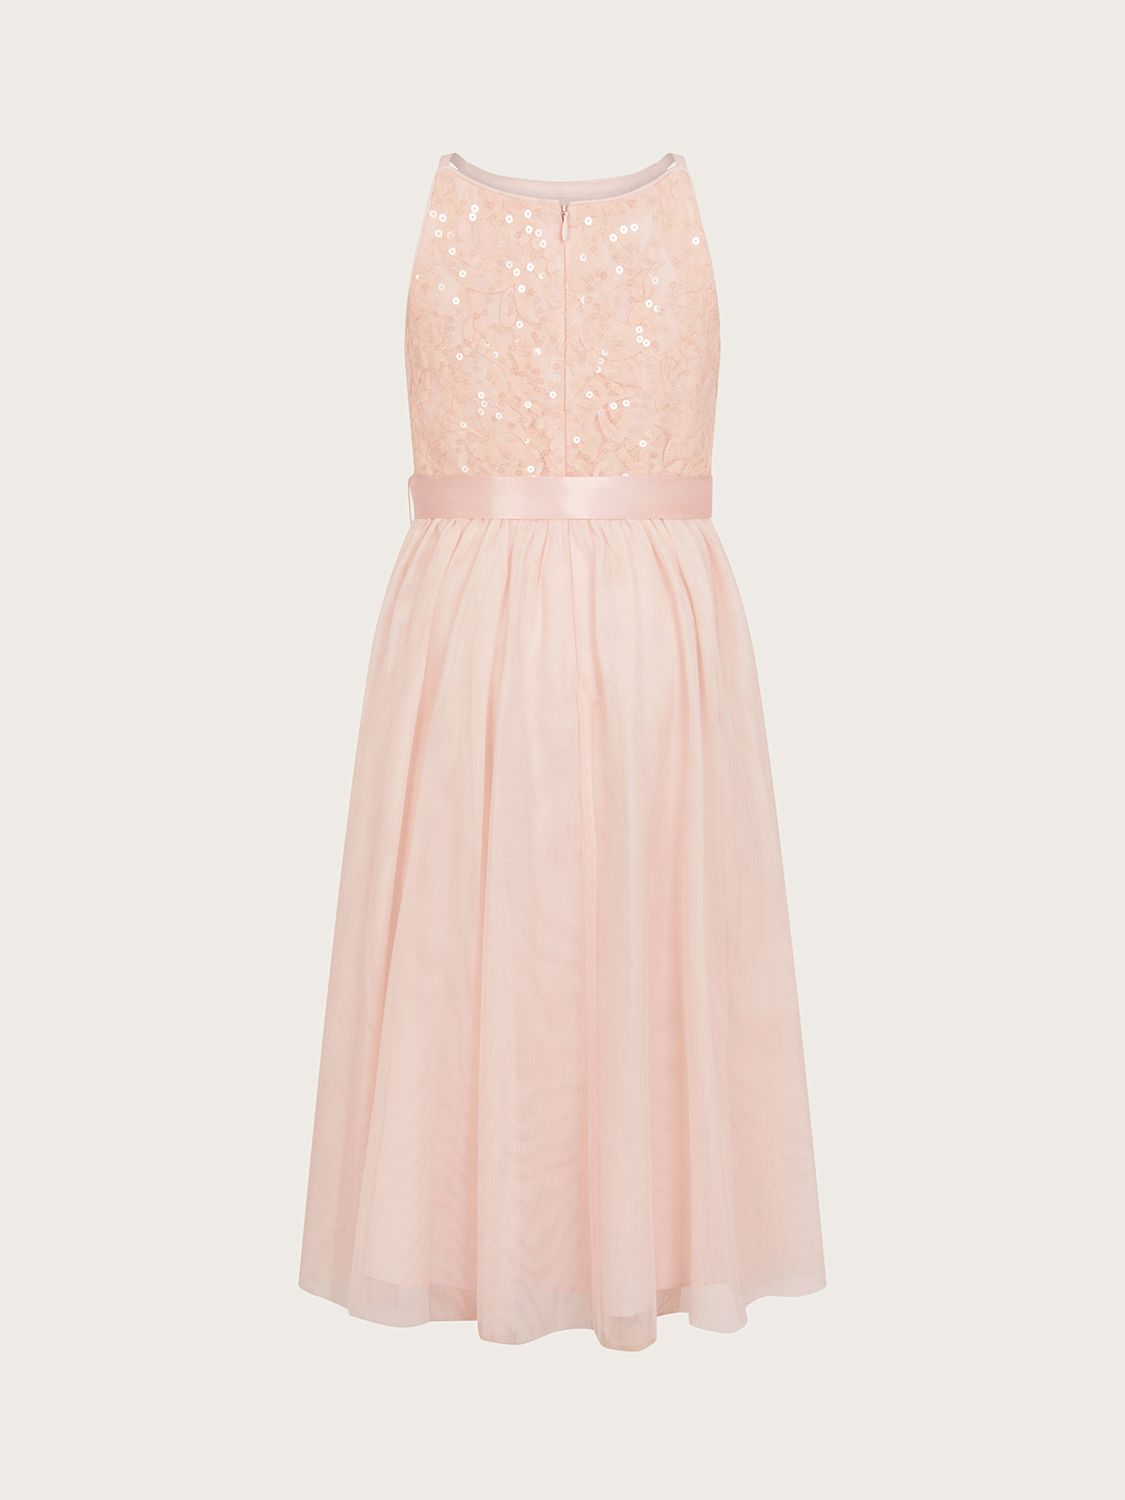 Buy Monsoon Kids' Lacey Truth Sequin Occasion Dress, Pink Online at johnlewis.com